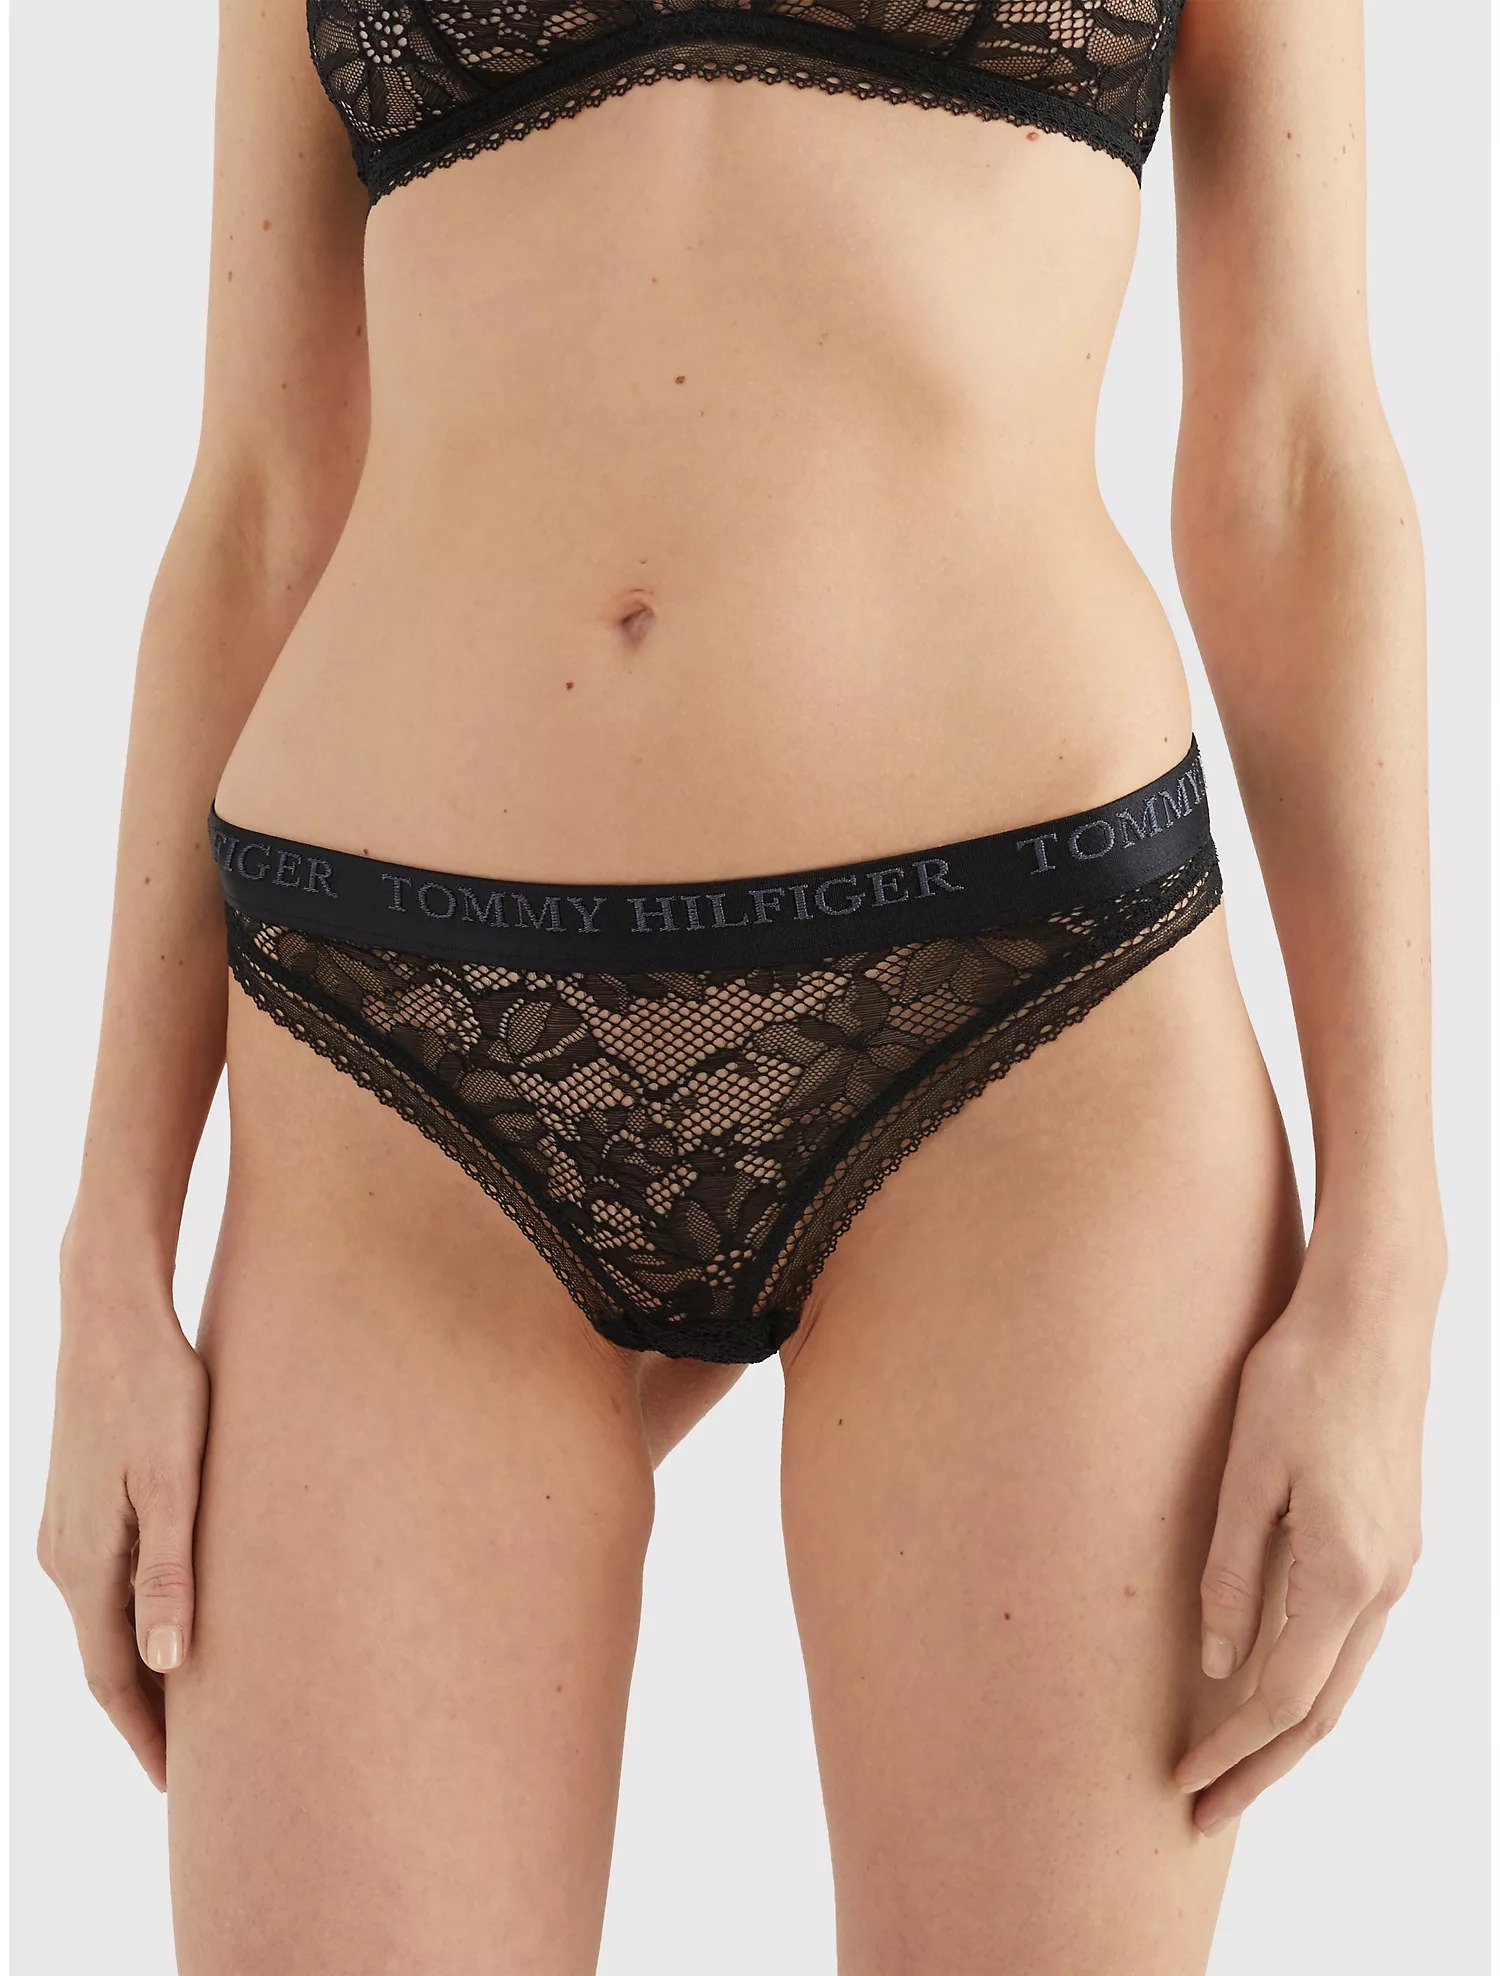 TOMMY HILFIGER LACE THONG